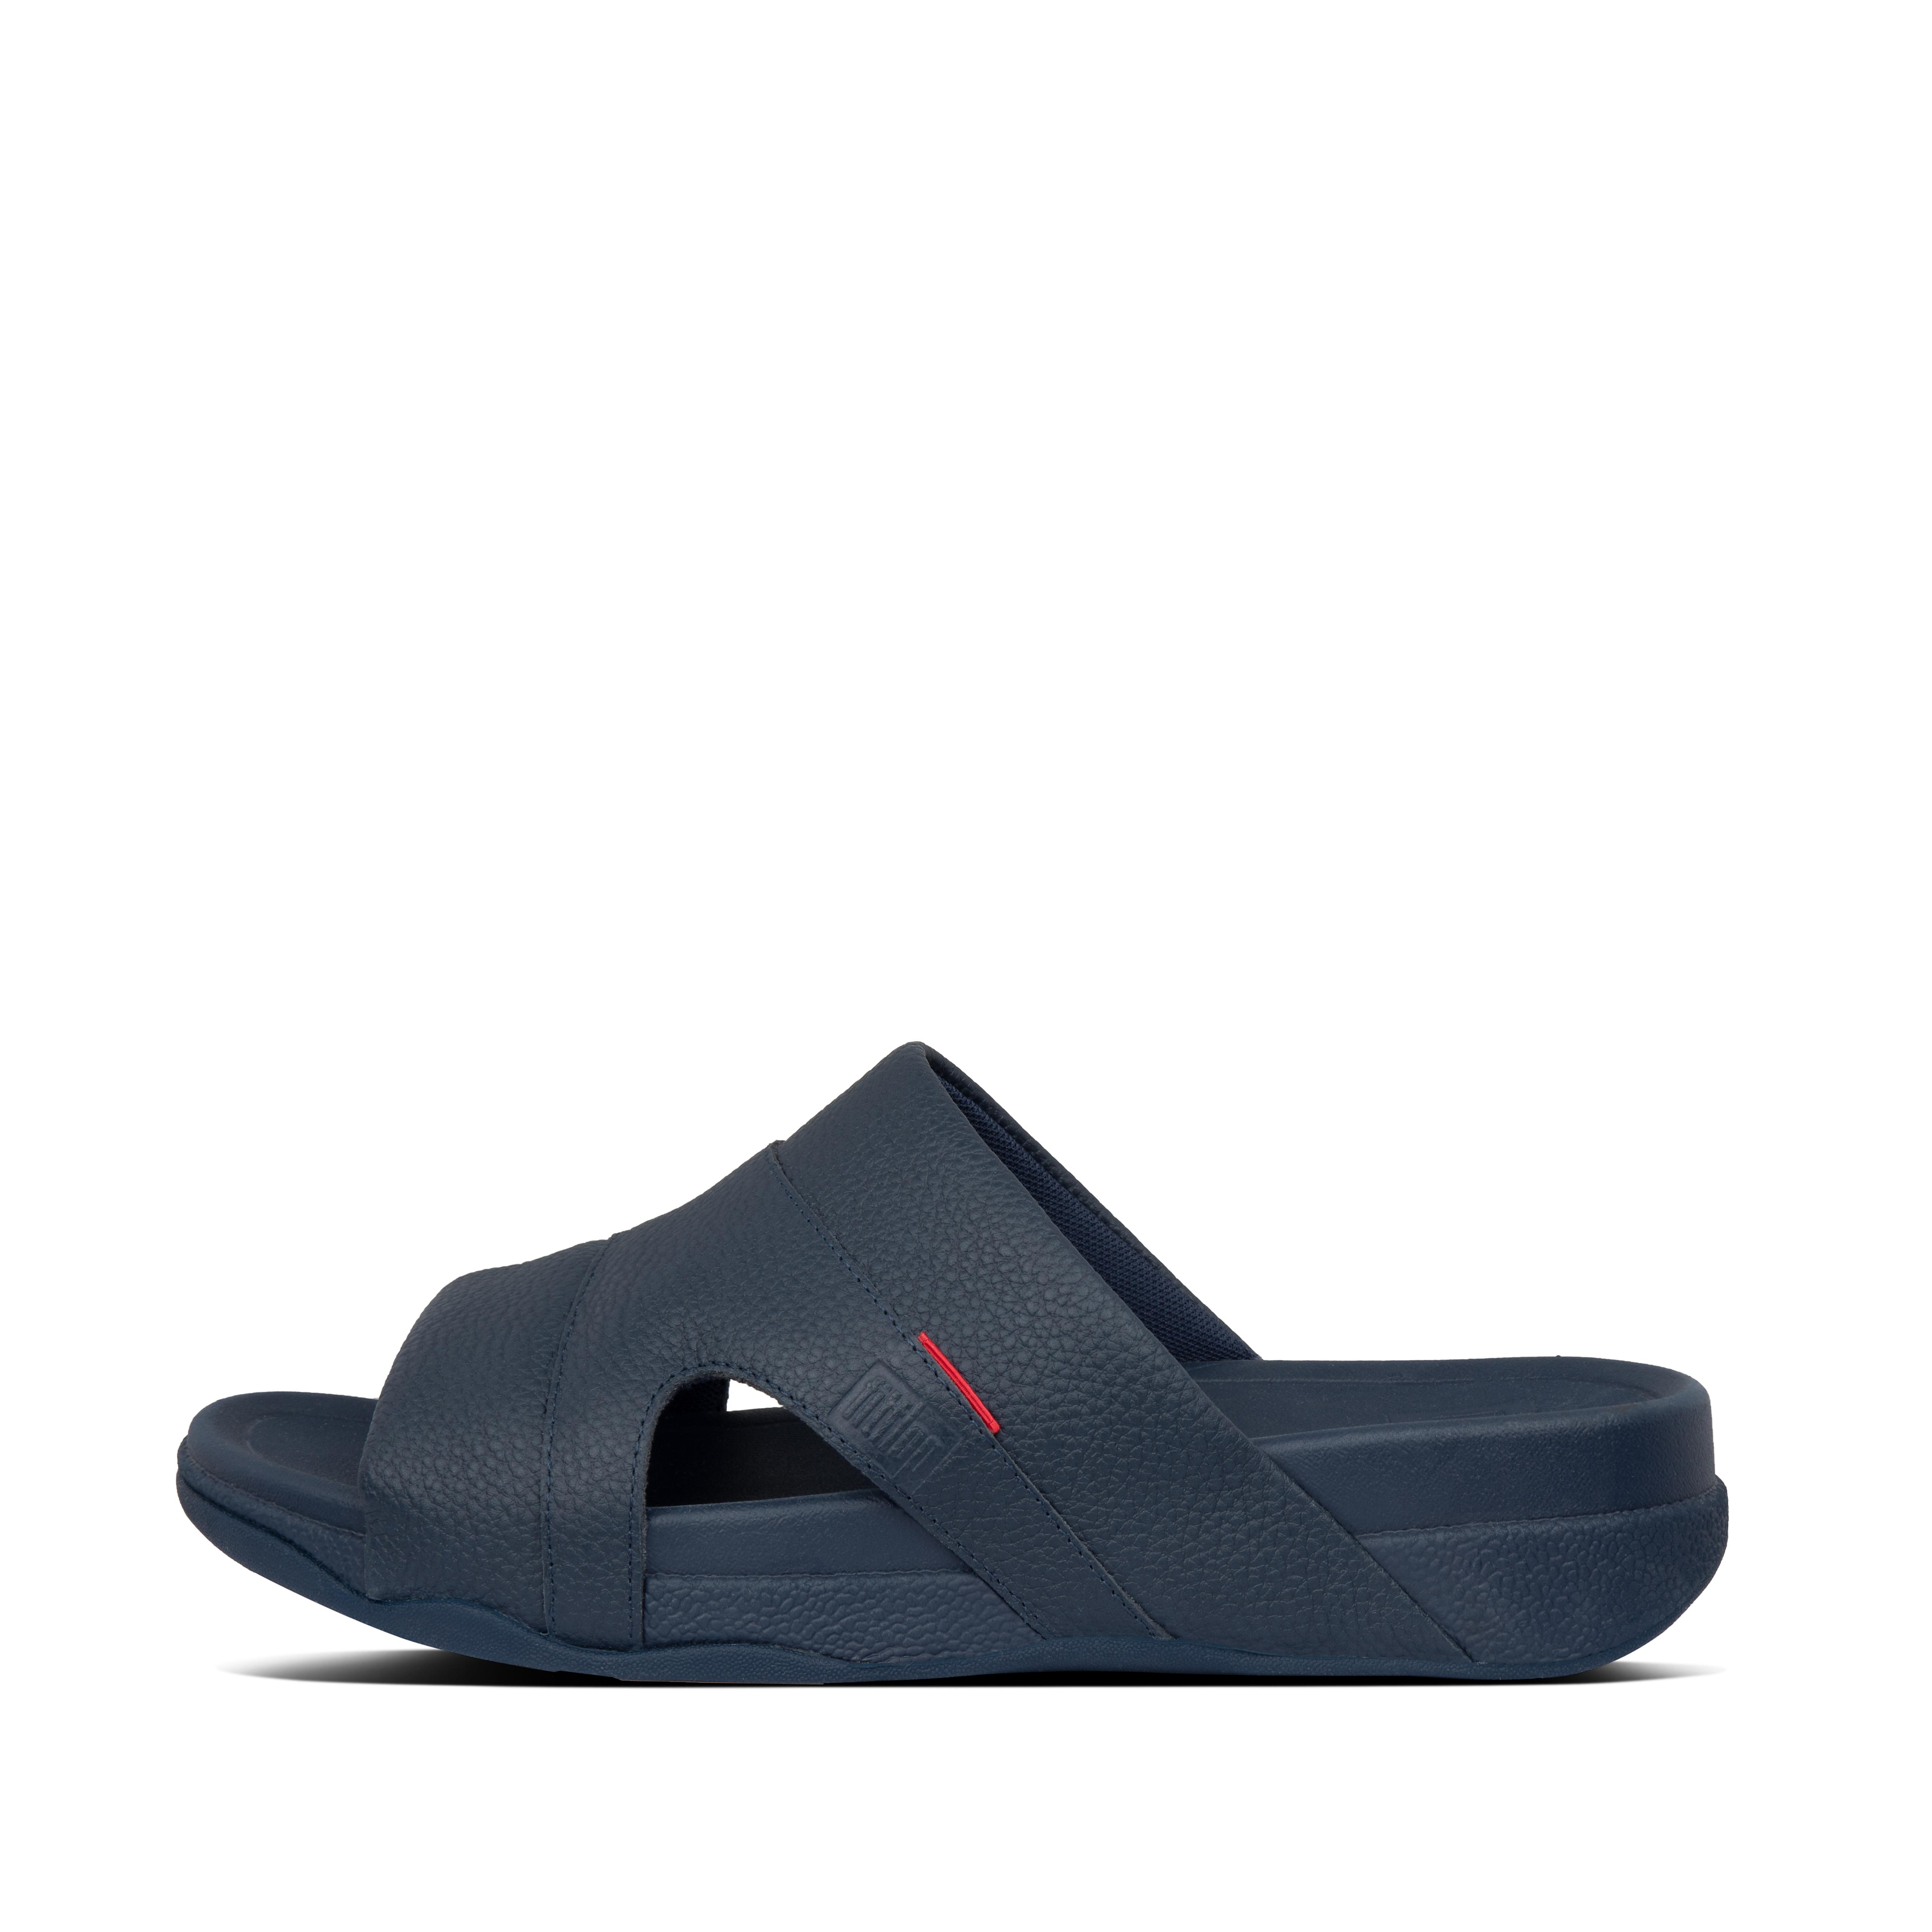 Mens Freeway Leather Slides | FitFlop US